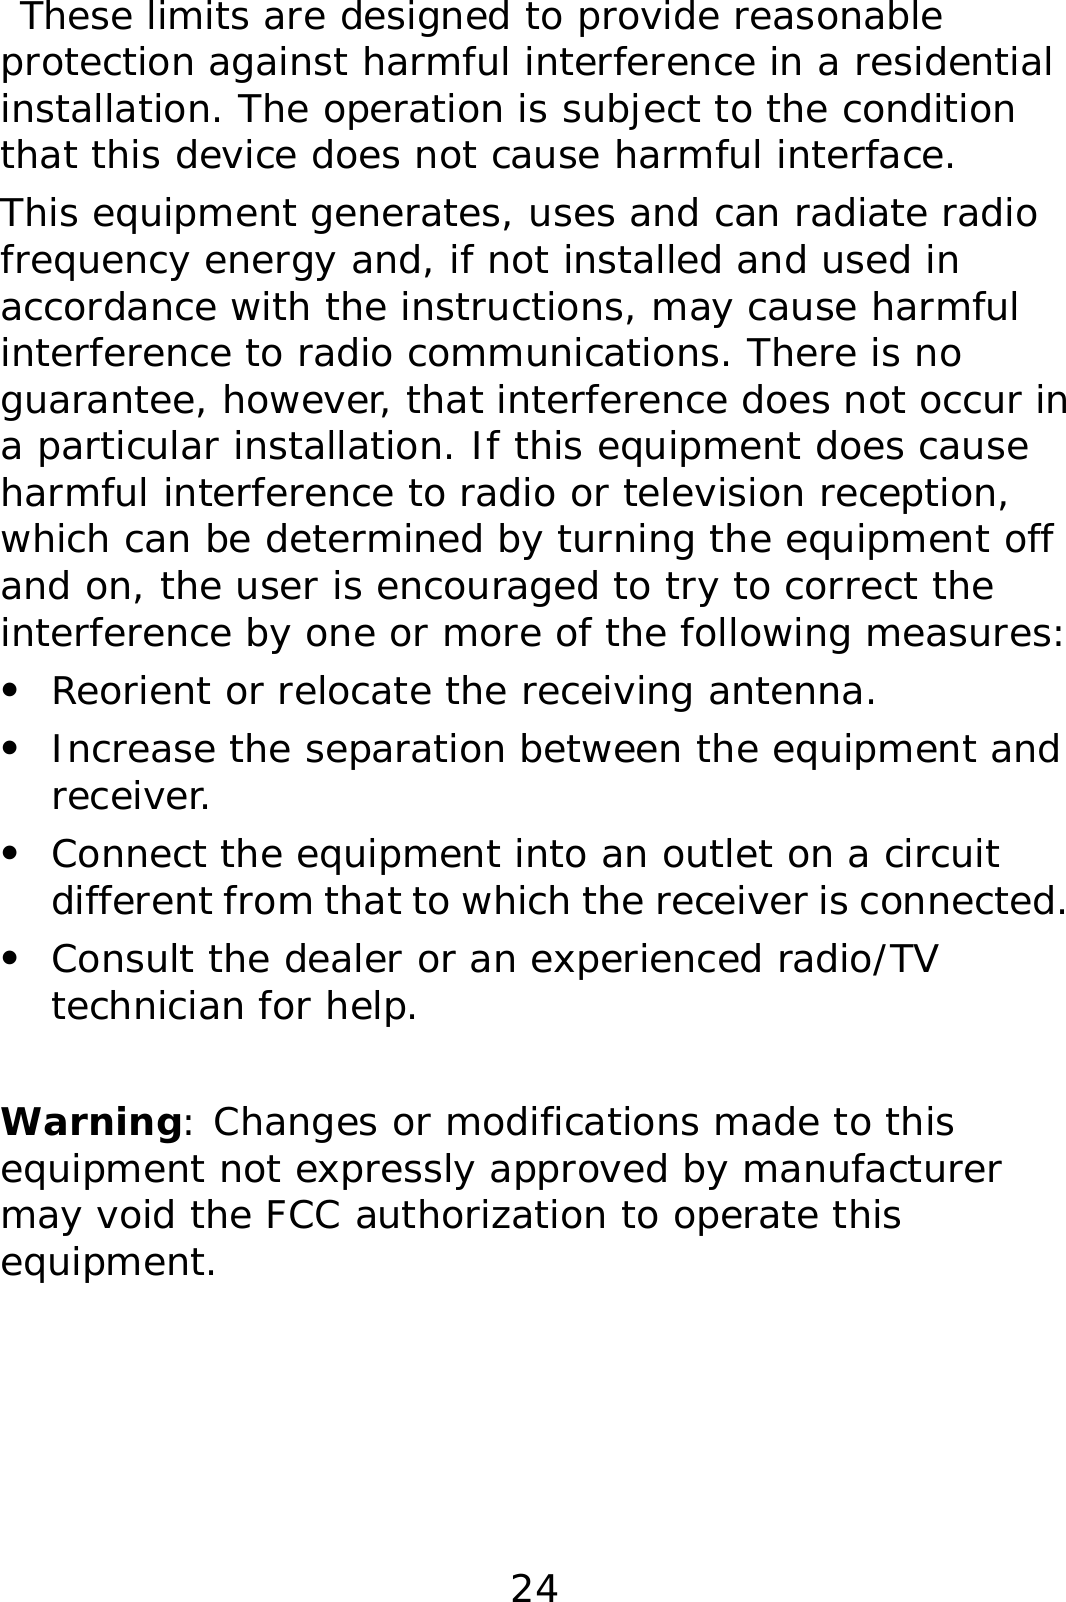 24  These limits are designed to provide reasonable protection against harmful interference in a residential installation. The operation is subject to the condition that this device does not cause harmful interface. This equipment generates, uses and can radiate radio frequency energy and, if not installed and used in accordance with the instructions, may cause harmful interference to radio communications. There is no guarantee, however, that interference does not occur in a particular installation. If this equipment does cause harmful interference to radio or television reception, which can be determined by turning the equipment off and on, the user is encouraged to try to correct the interference by one or more of the following measures: z Reorient or relocate the receiving antenna. z Increase the separation between the equipment and receiver. z Connect the equipment into an outlet on a circuit different from that to which the receiver is connected. z Consult the dealer or an experienced radio/TV technician for help.  Warning: Changes or modifications made to this equipment not expressly approved by manufacturer may void the FCC authorization to operate this equipment.    